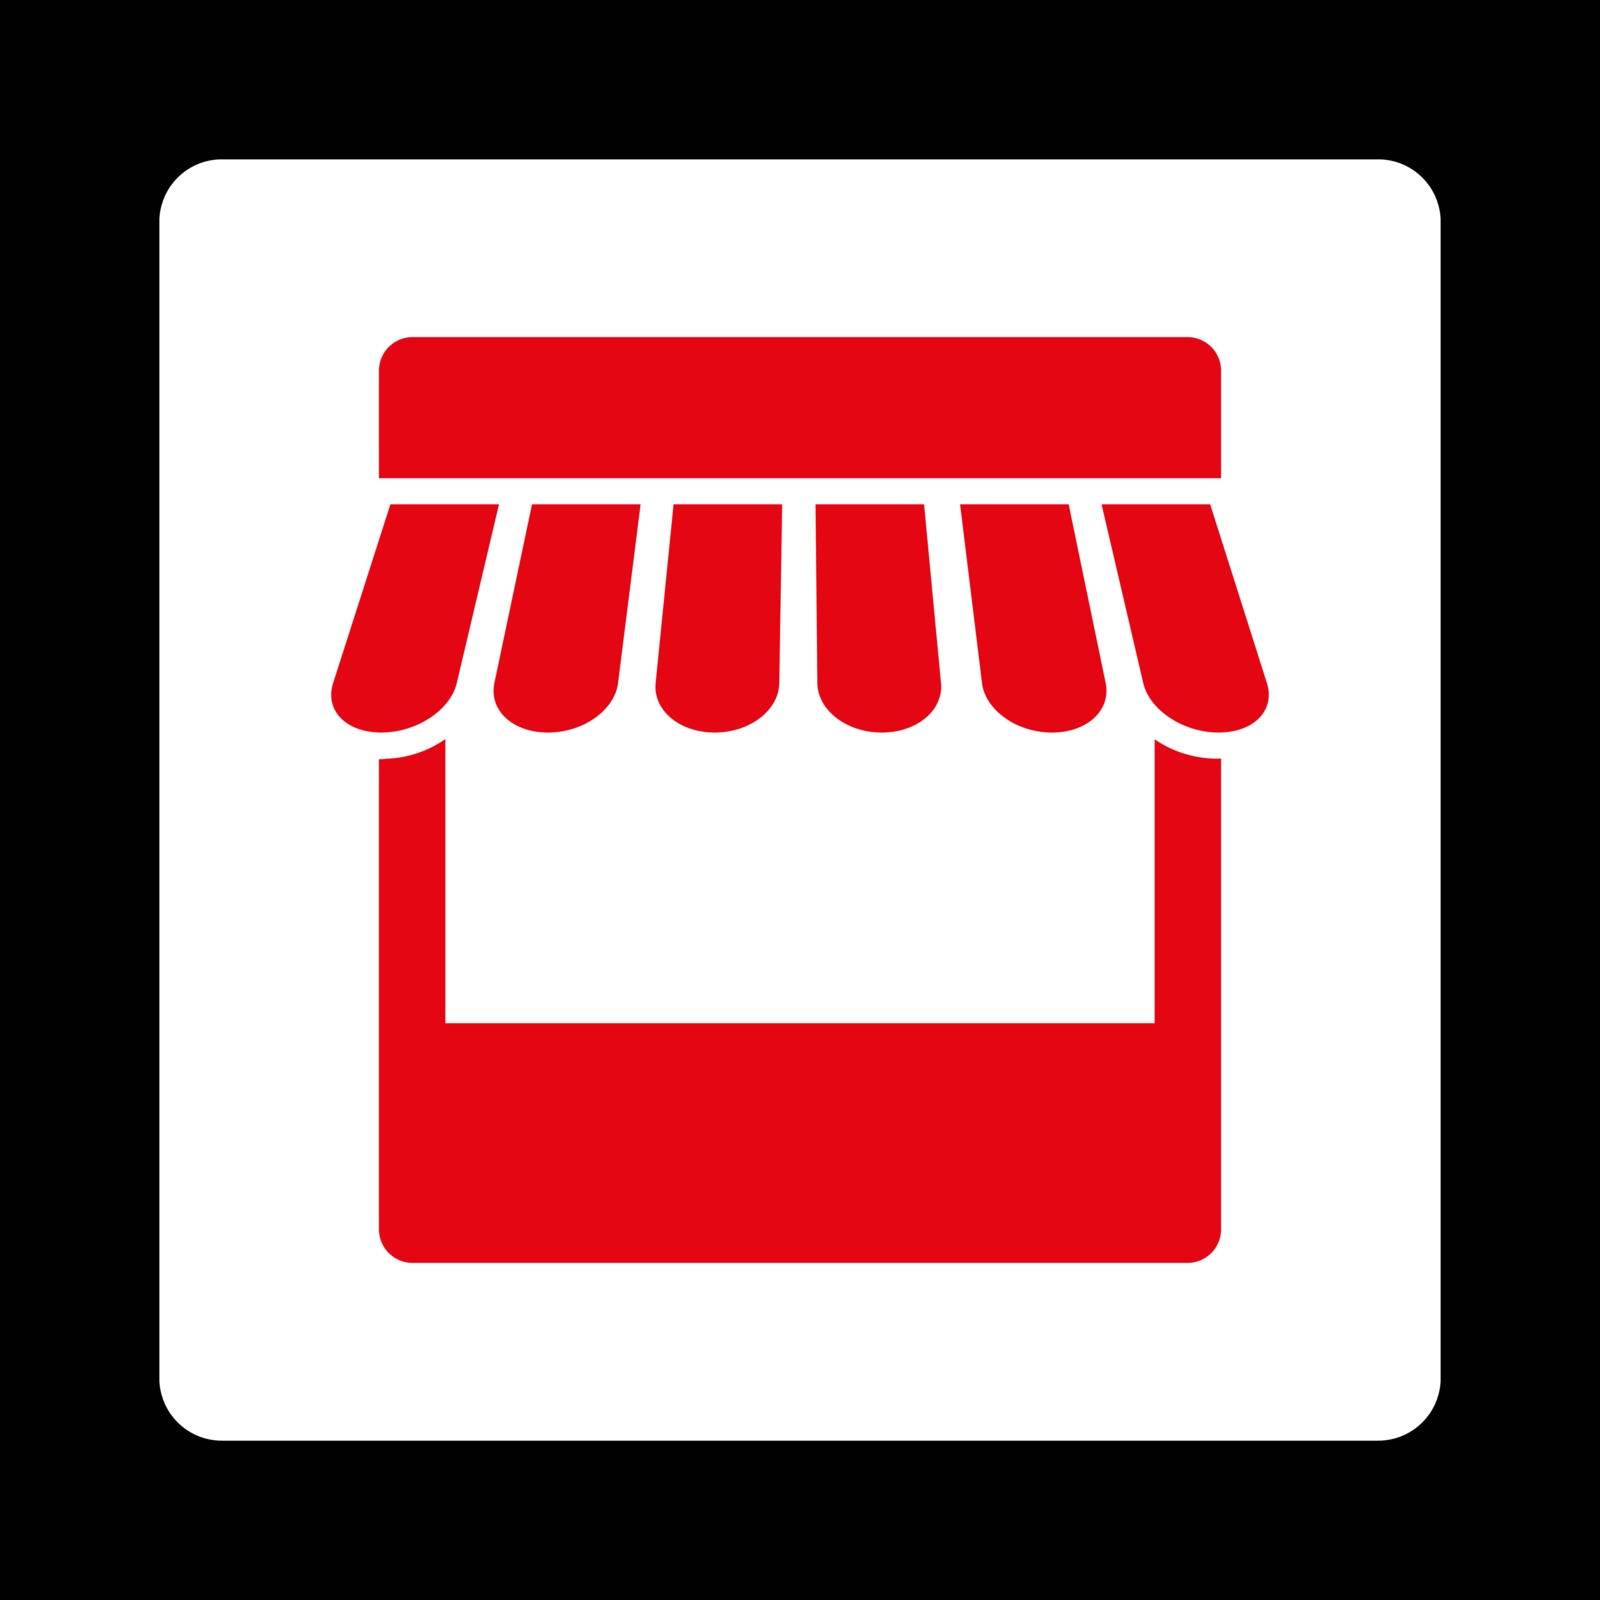 Store icon. Vector style is red and white colors, flat rounded square button on a black background.